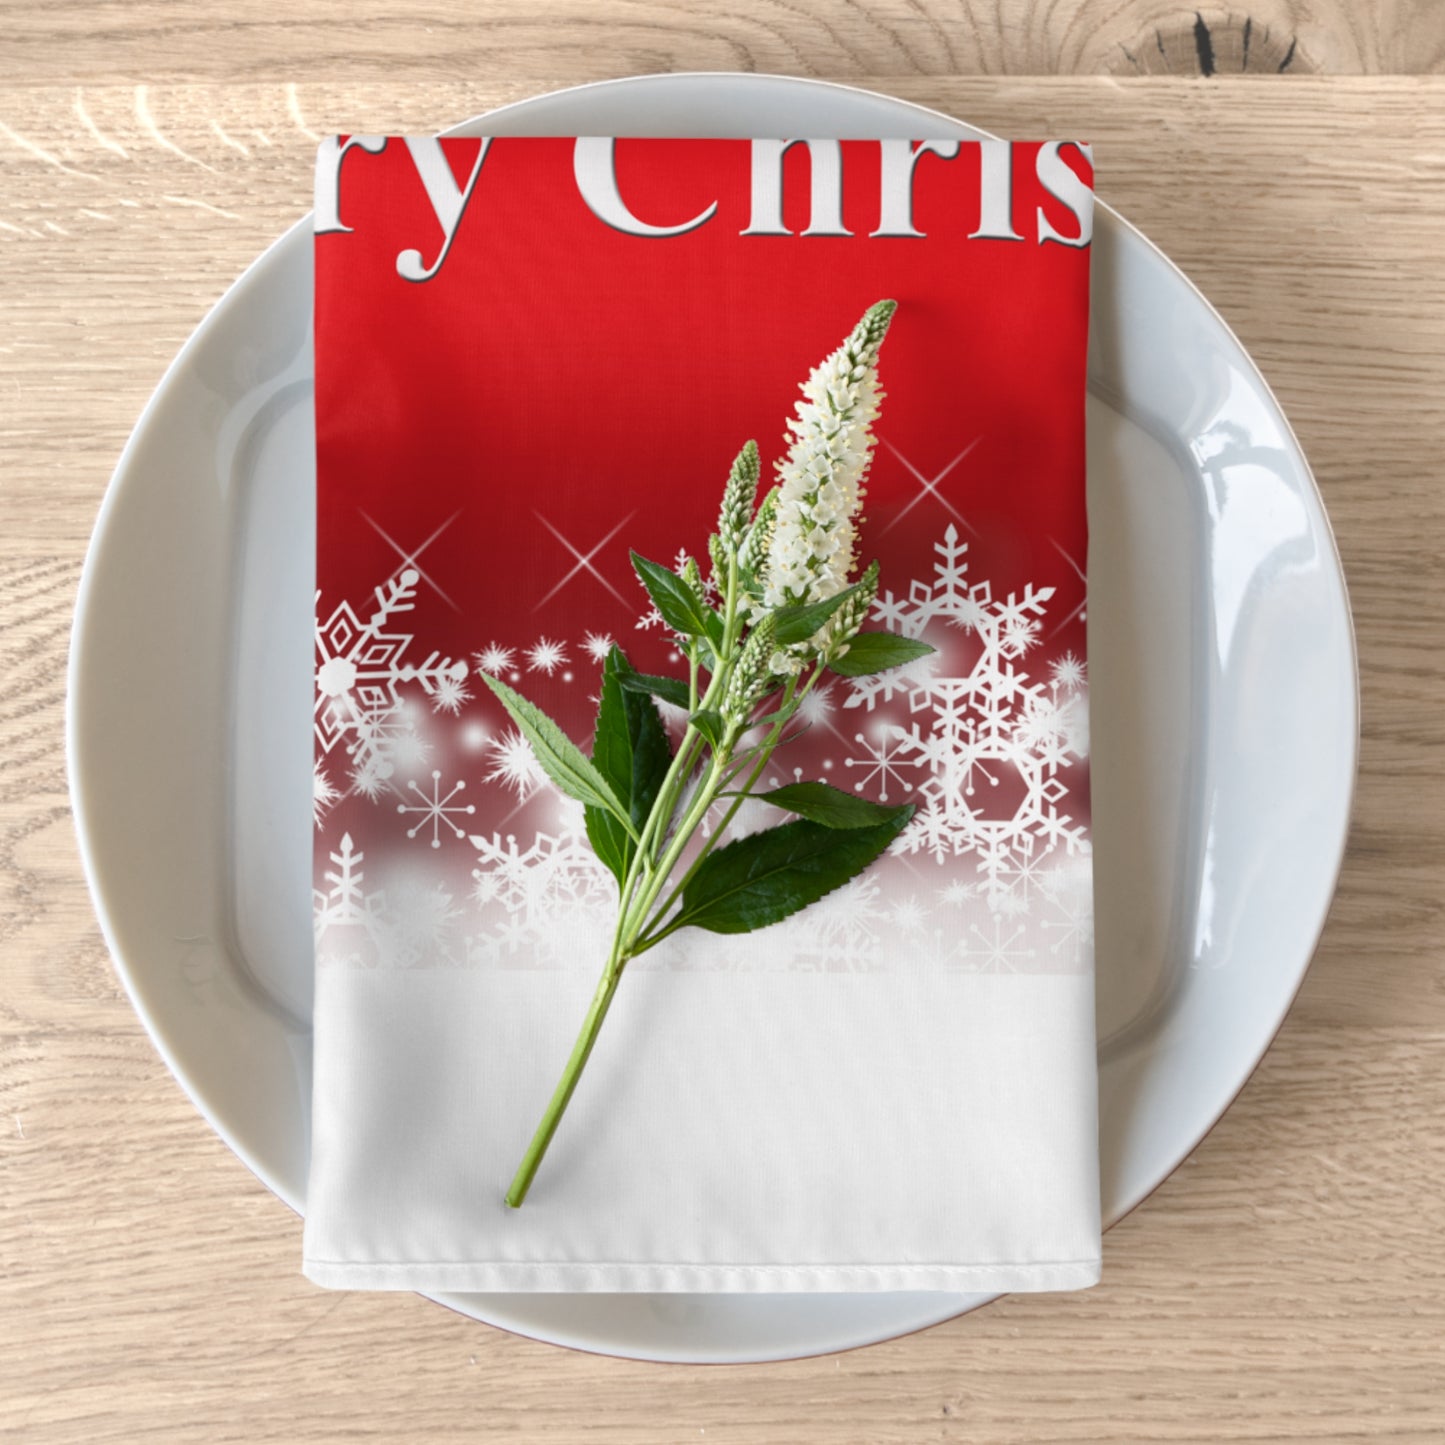 "Merry Christmas" Napkins with White Snowflakes and Red Background, Elegant Design for Your Holiday Party